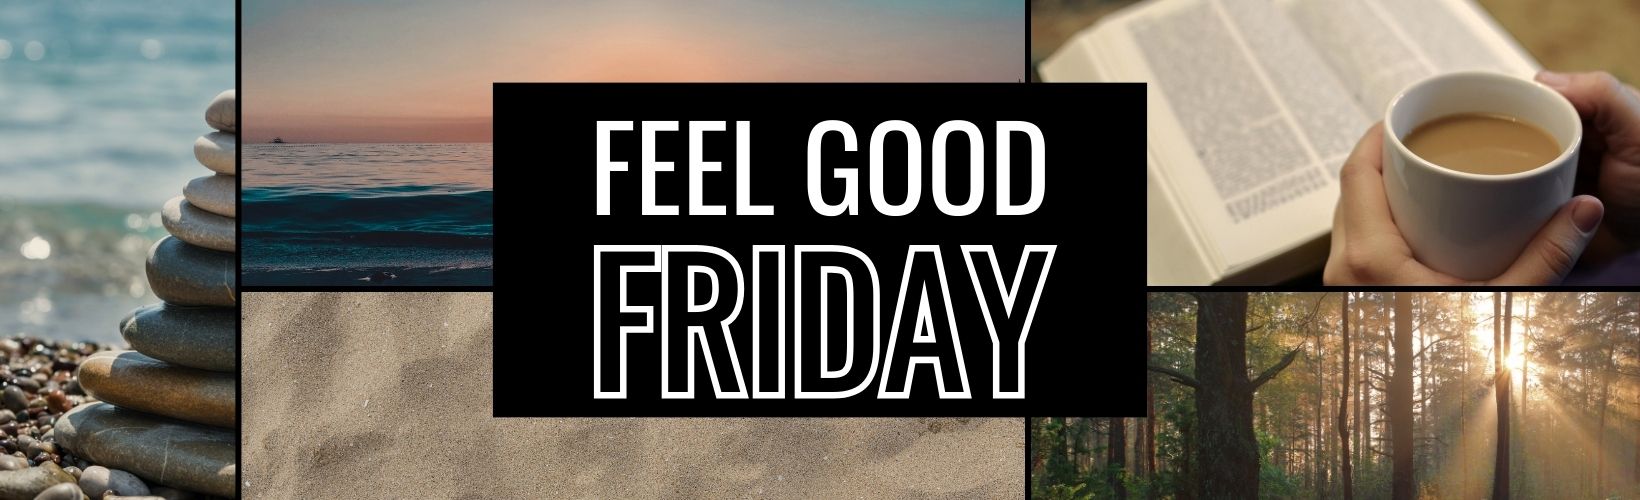 Feel Good Friday: How to Make the Most of Your Weekend